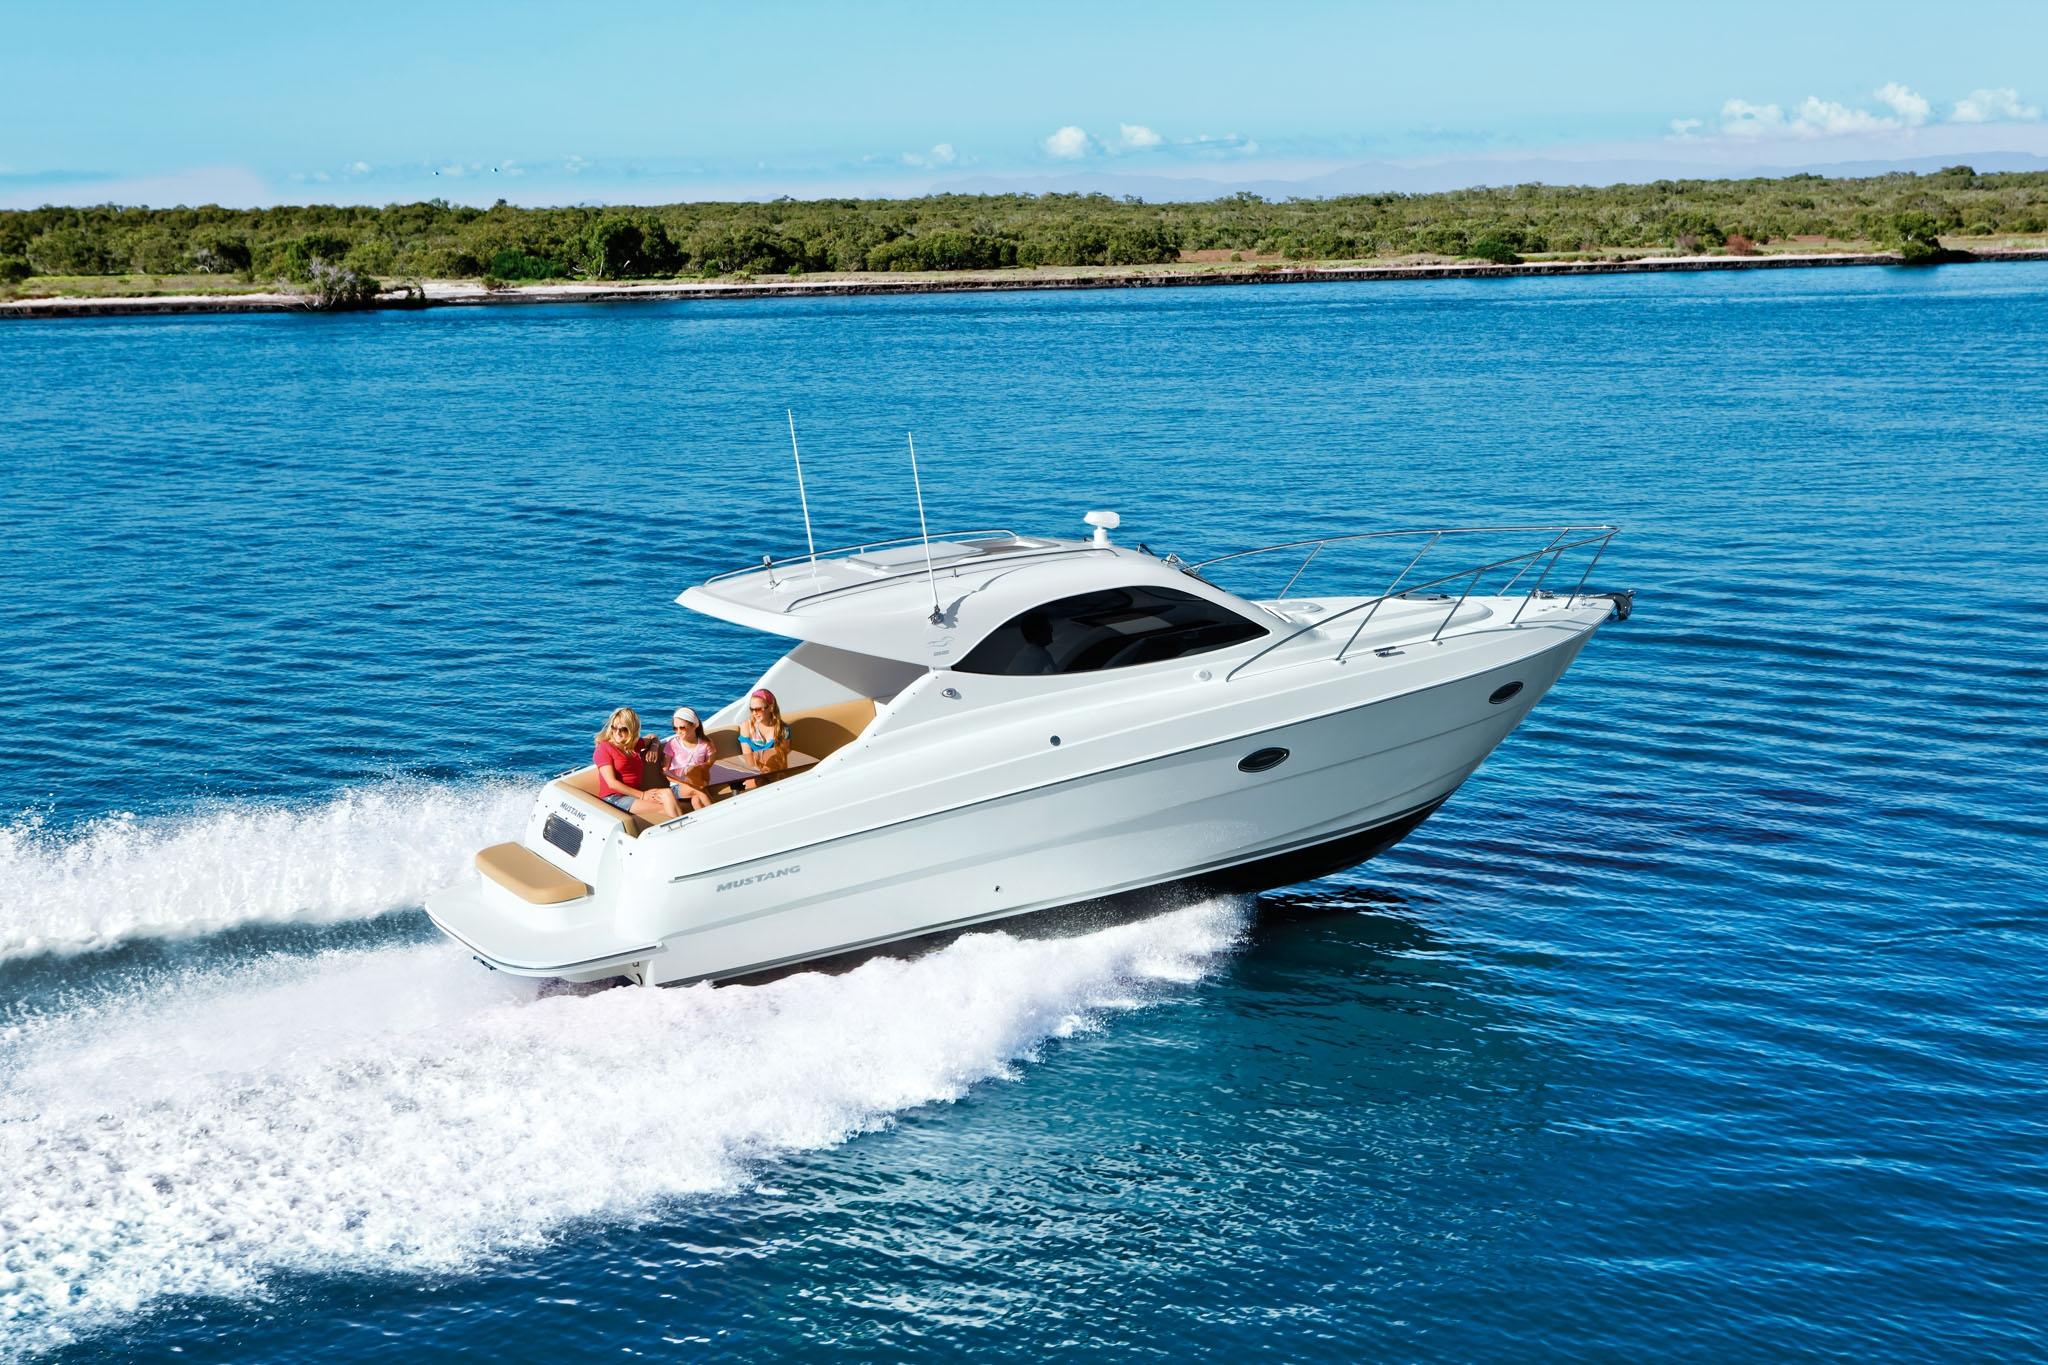 NEW BOATS — Sydneysiders sold on compact Cruiser, Maritimo says